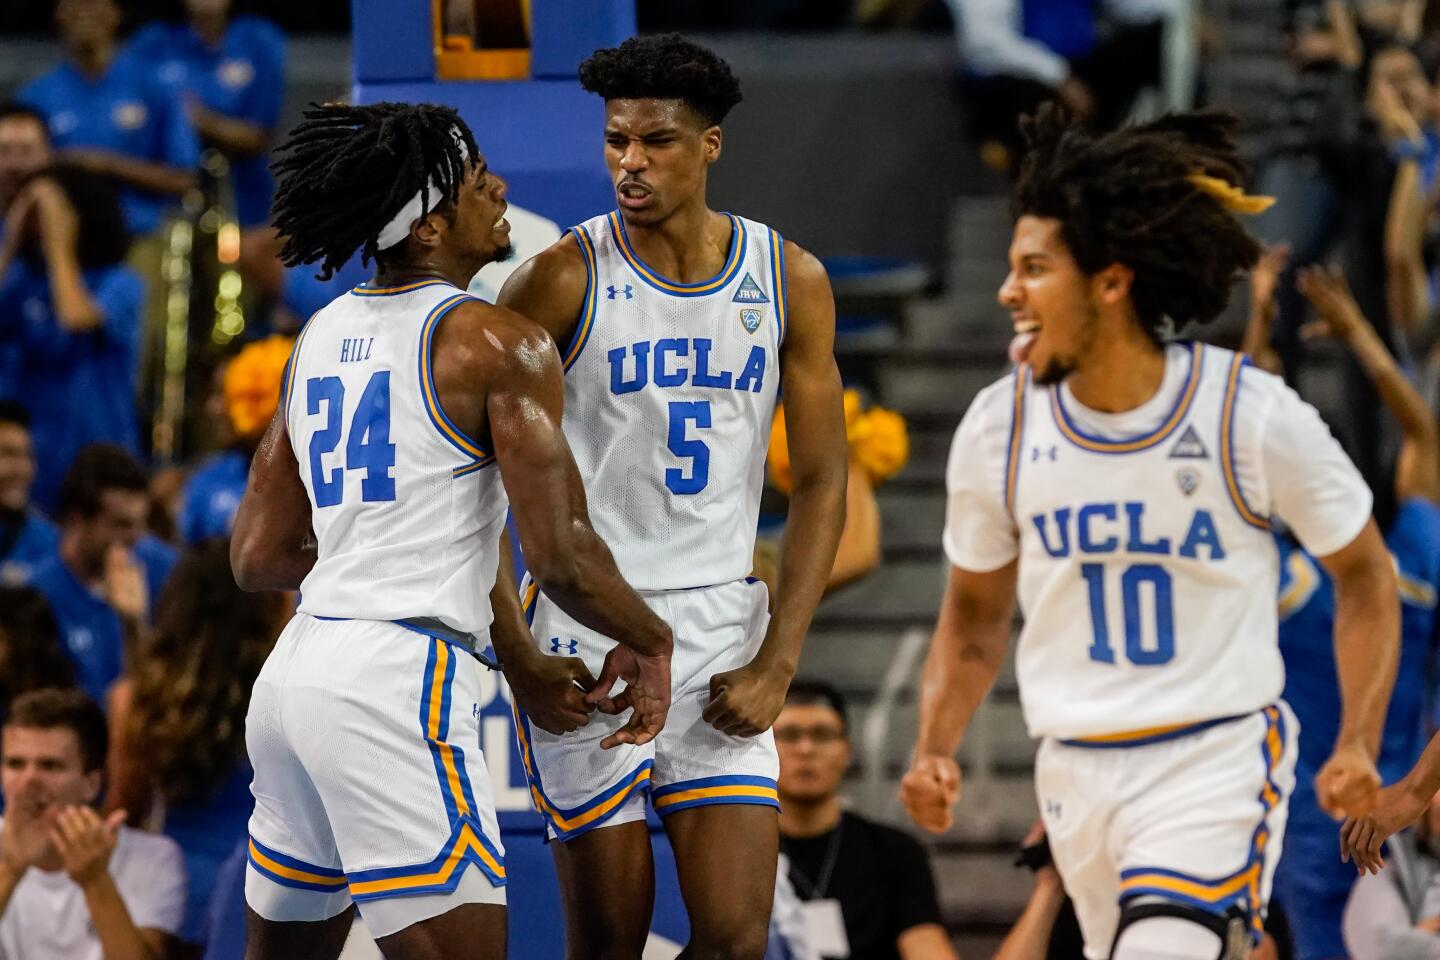 UCLA forward Jalen Hill (24) and guard Chris Smith (5) celebrate after a basket during the first half of a game Nov. 6 against Long Beach State at Pauley Pavilion.